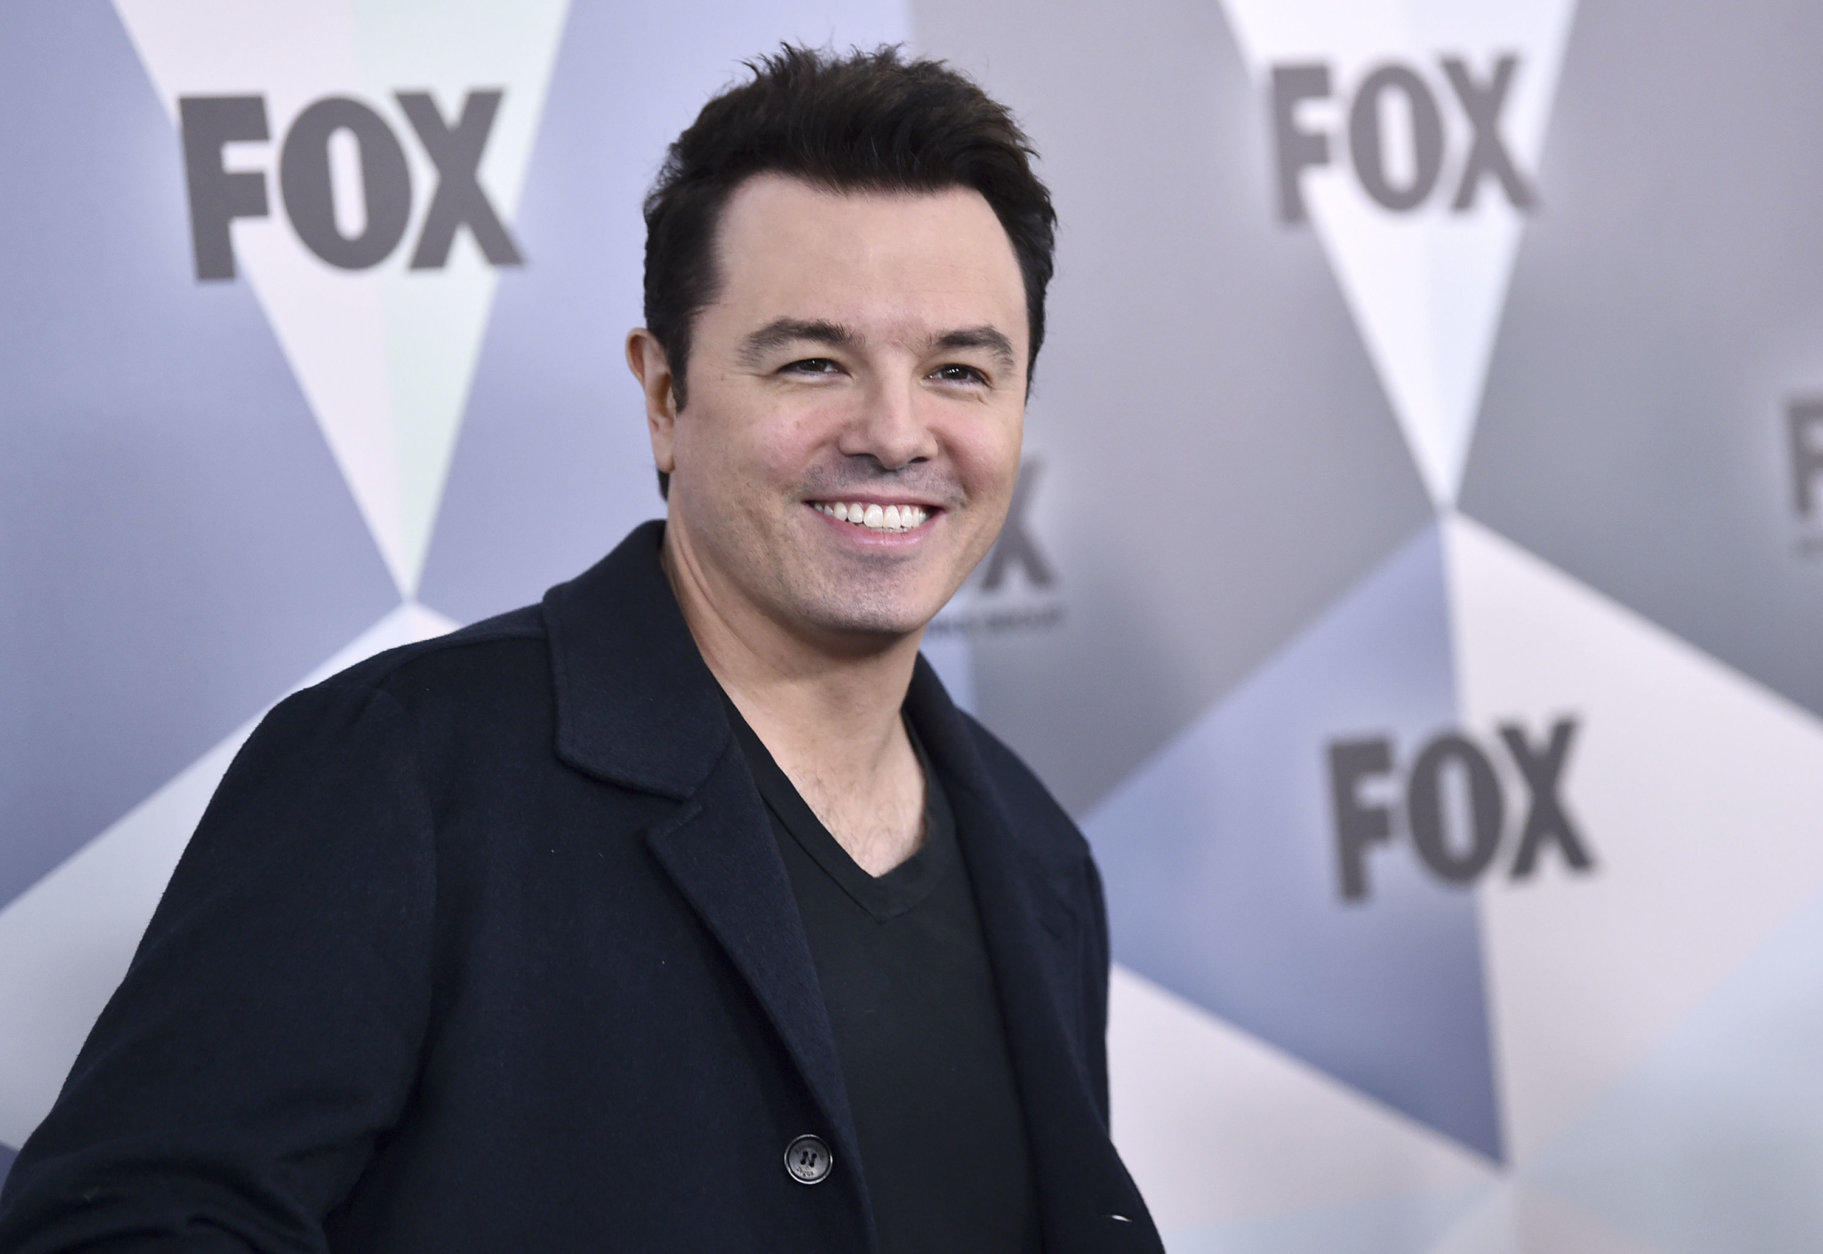 Seth MacFarlane, a members of the cast of "The Orville," attends the Fox Networks Group 2018 programming presentation afterparty at Wollman Rink in Central Park on Monday, May 14, 2018, in New York. (Photo by Evan Agostini/Invision/AP)